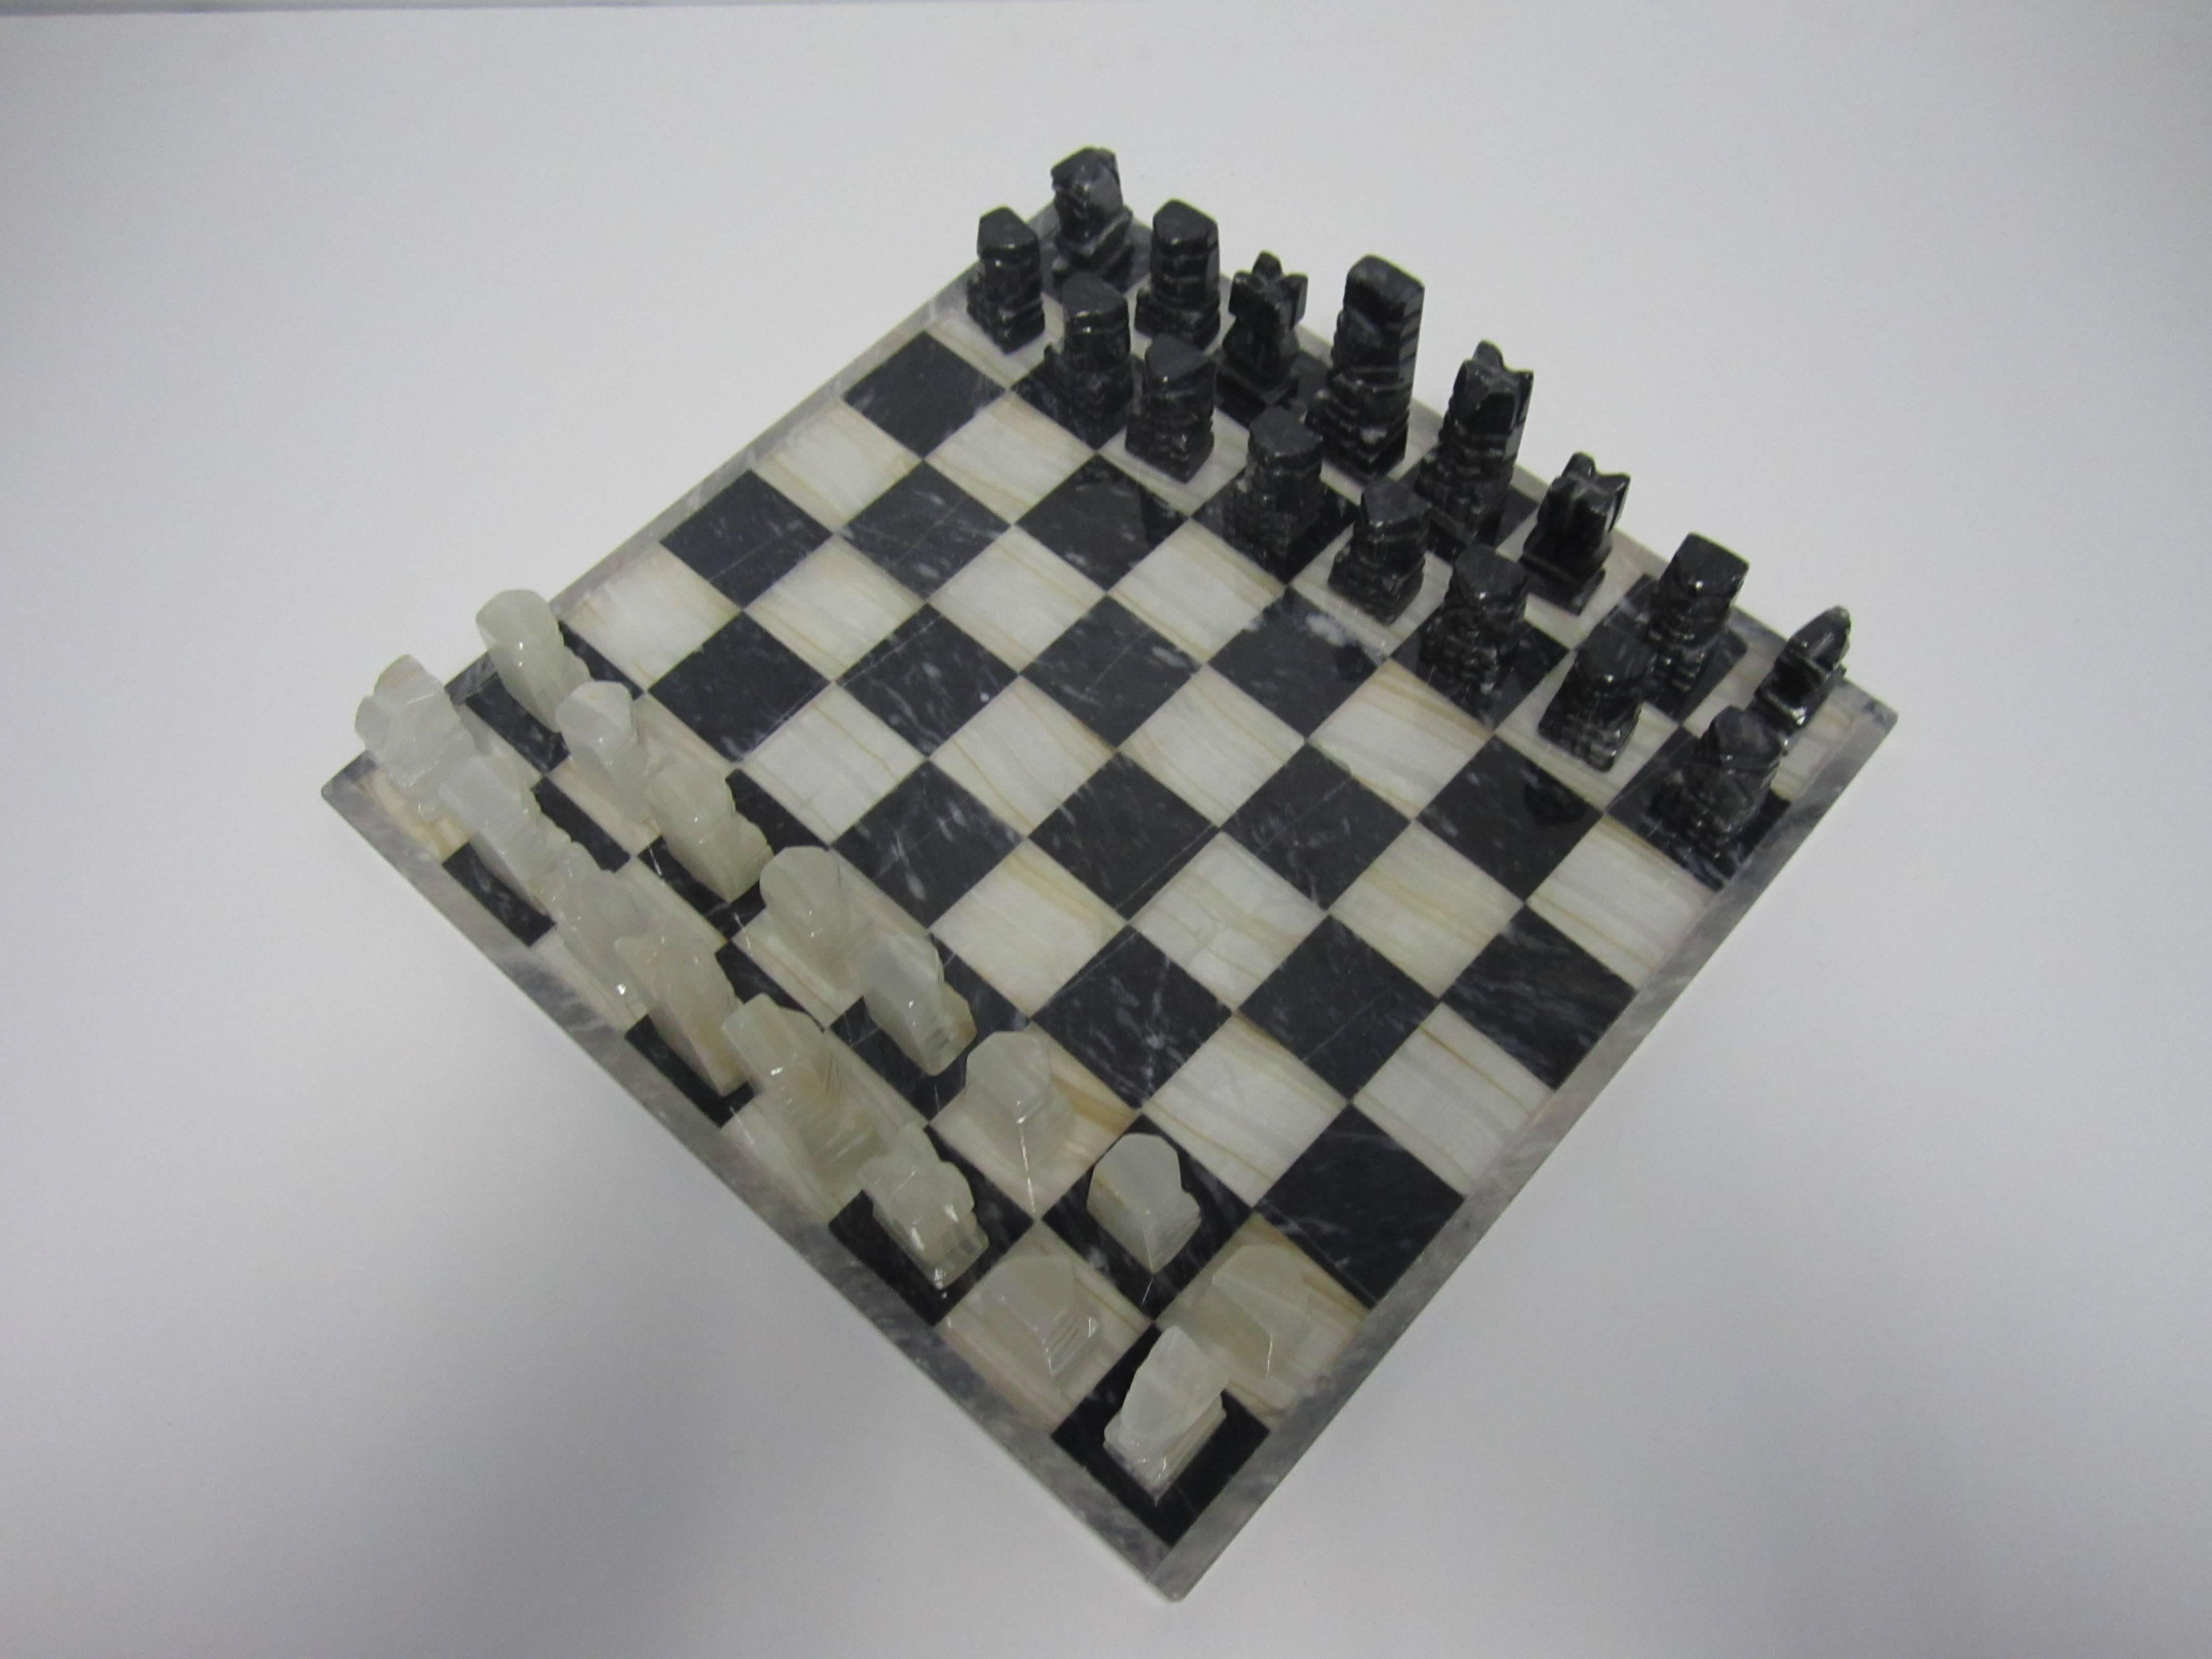 A vintage modern black and white marble and onyx chess set. Complete set of 32 pieces plus board. Board is black and white with grey boarder. Pieces are hand-carved black and 'white' onyx (white onyx hue ranges from white to off-white.) Circa 1970s.